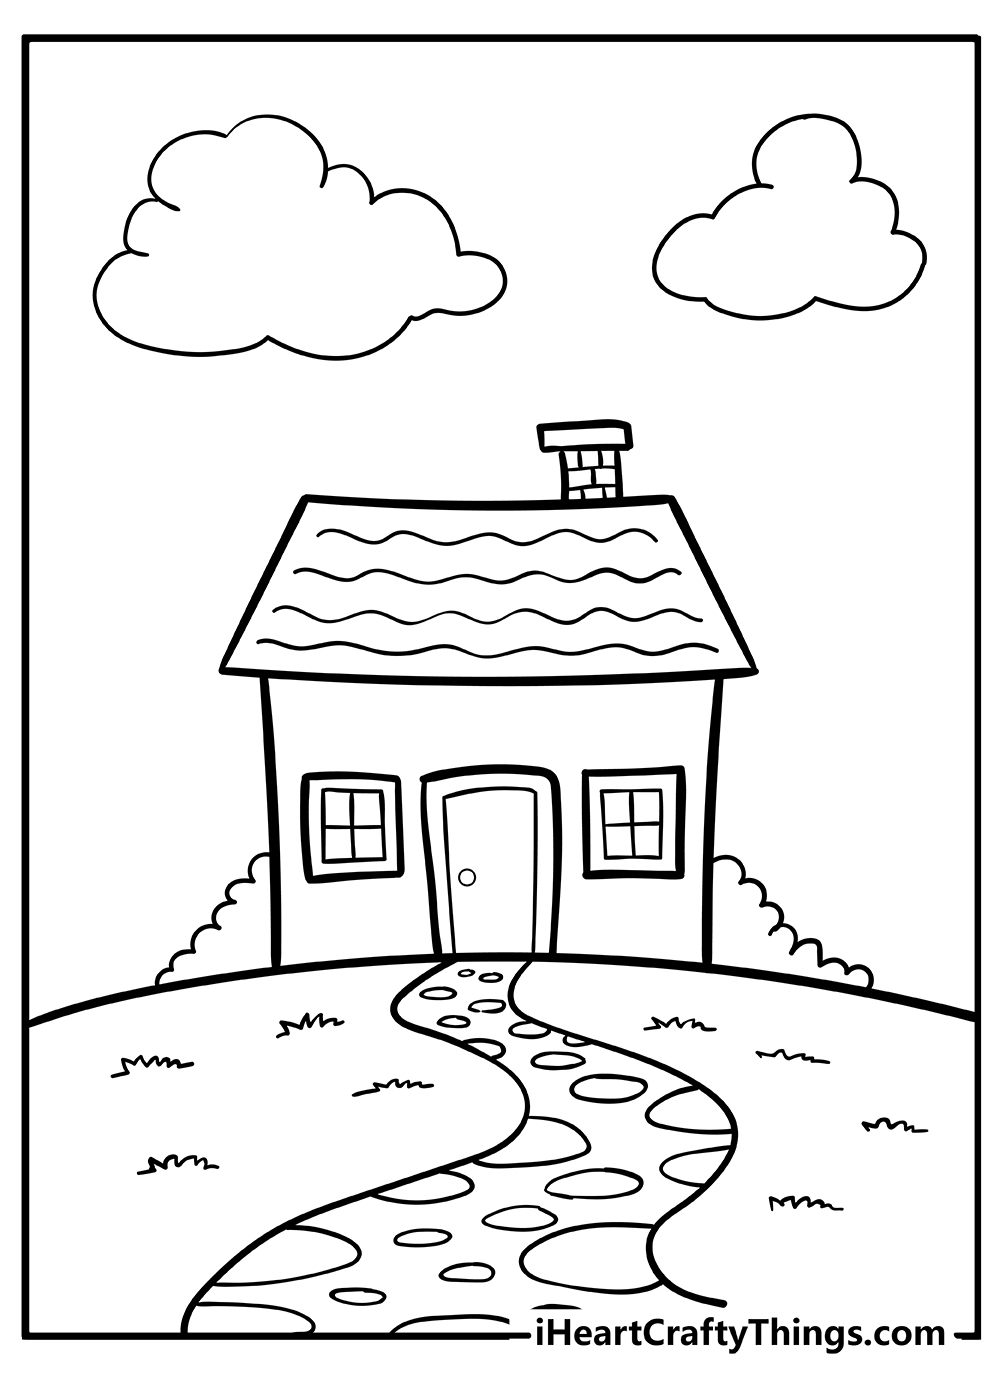 House coloring pages free printables